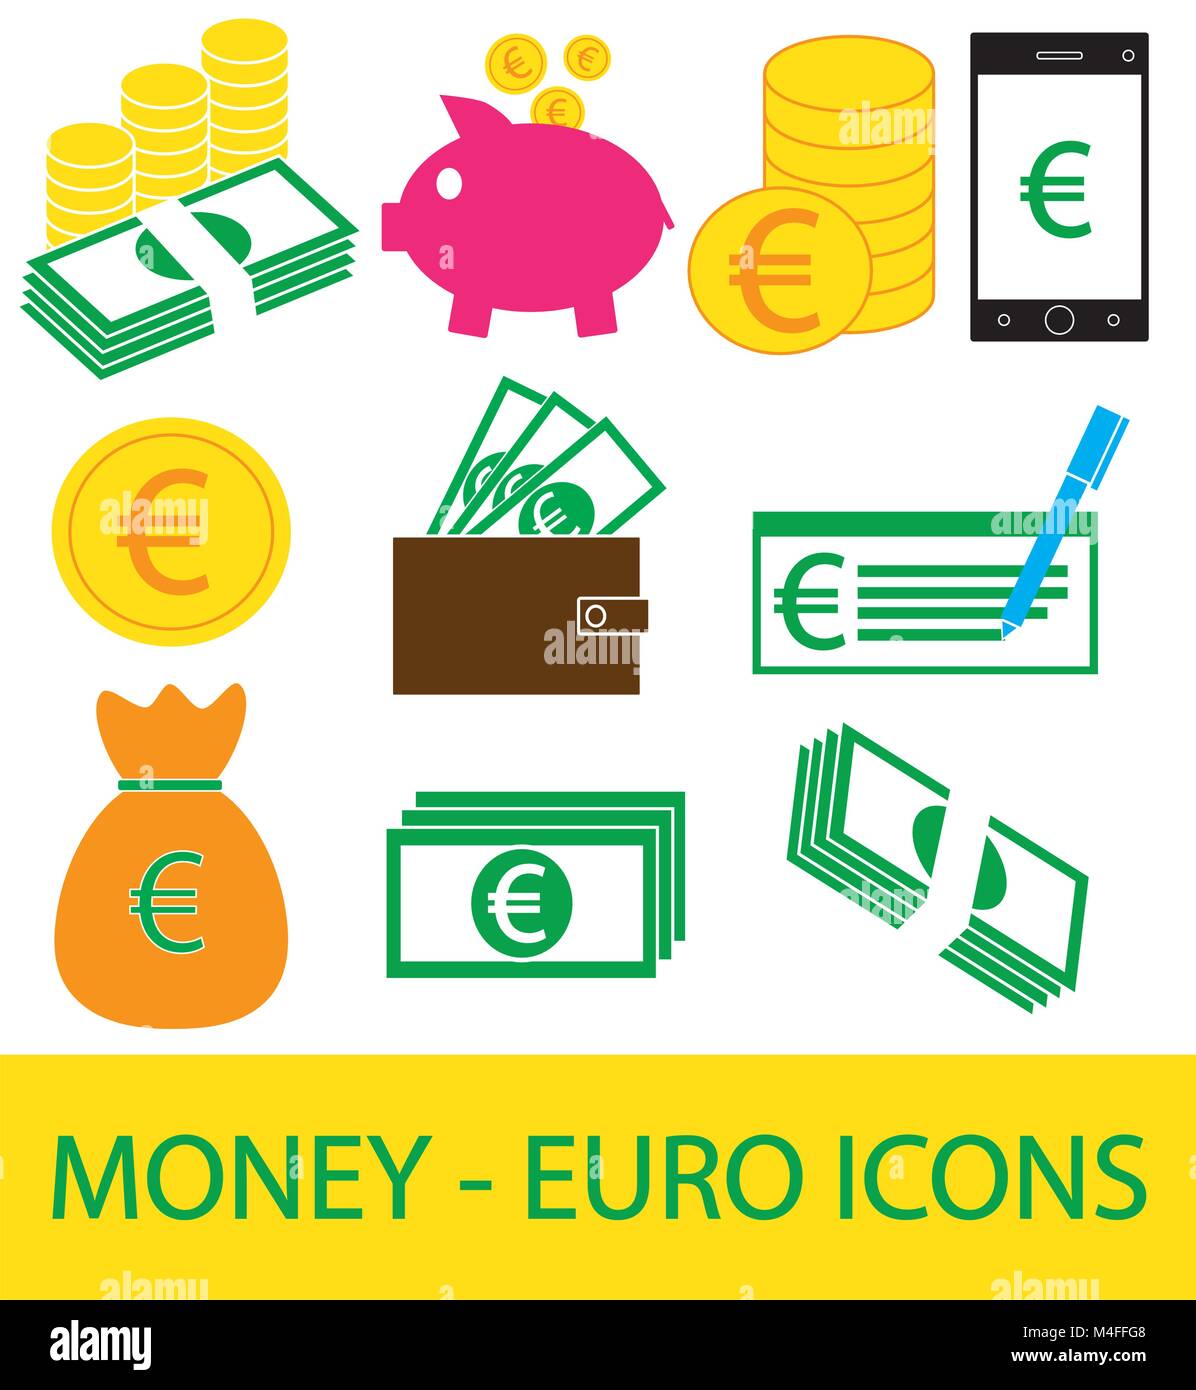 set collection or pack of euro currency icon or logo vector coins stock vector image art alamy https www alamy com stock photo set collection or pack of euro currency icon or logo vector coins 174903800 html